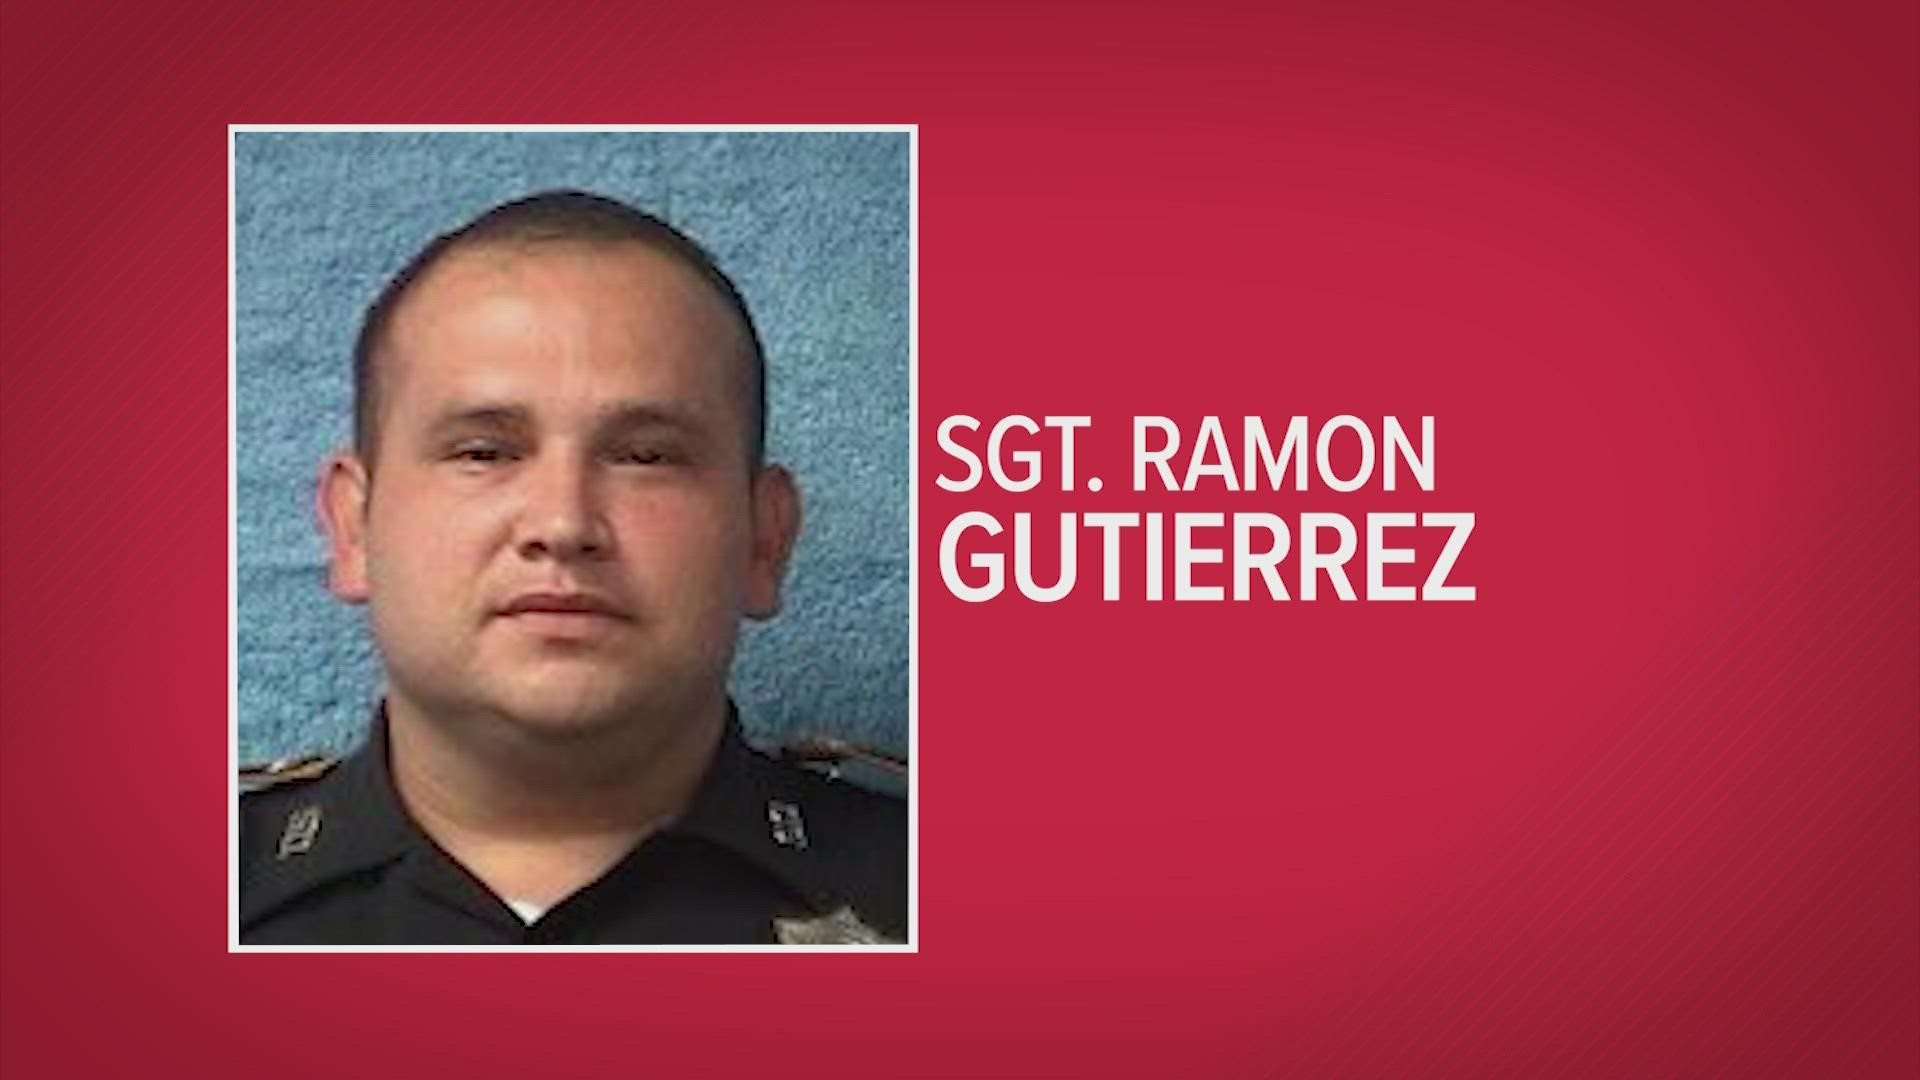 Sheriff Ed Gonzalez has identified HCSO Sgt. Ramon Gutierrez as the sergeant who died after being struck by a suspected hit-and-run driver.